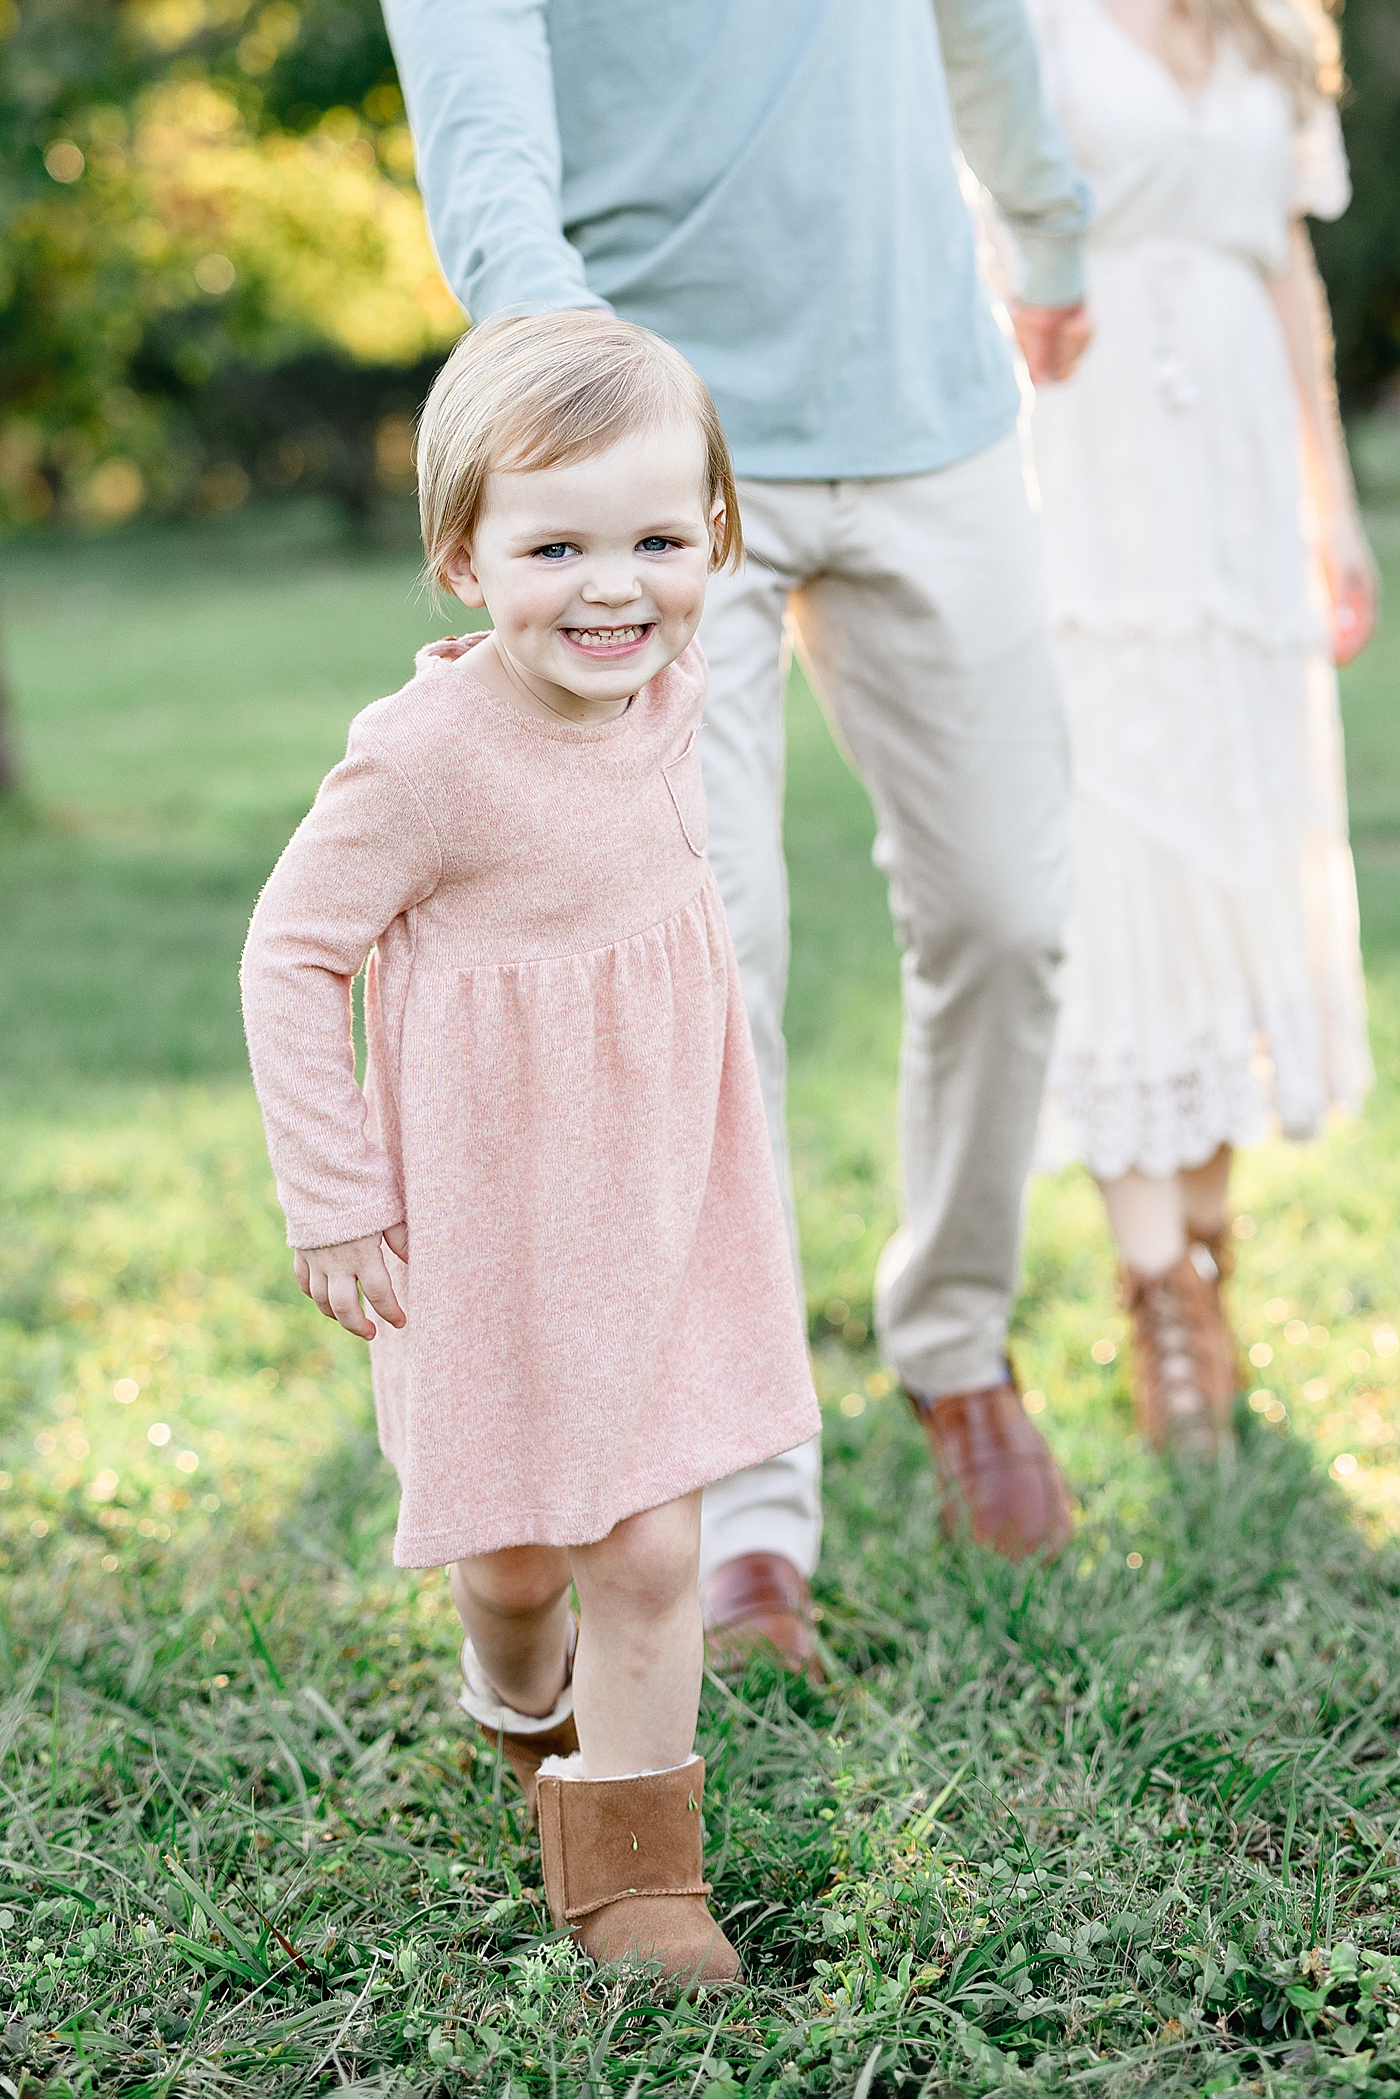 Toddler leading family as they walk through field for photos with Brittany Elise Photography.